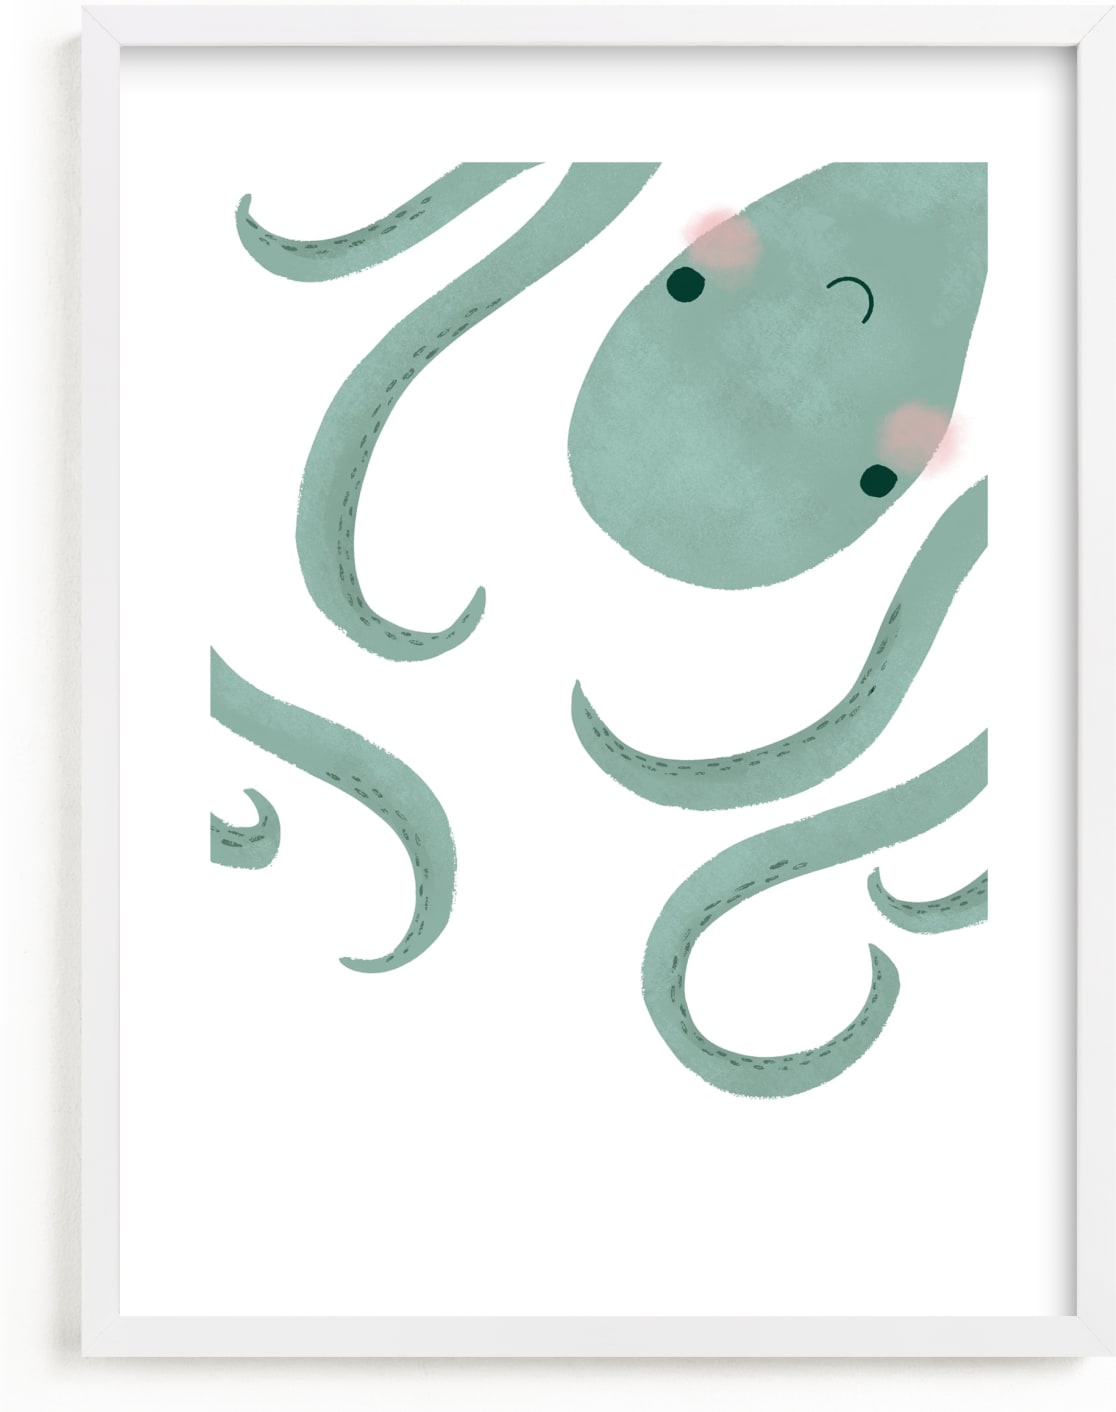 This is a green art by Jackie Crawford called Little Septopus.